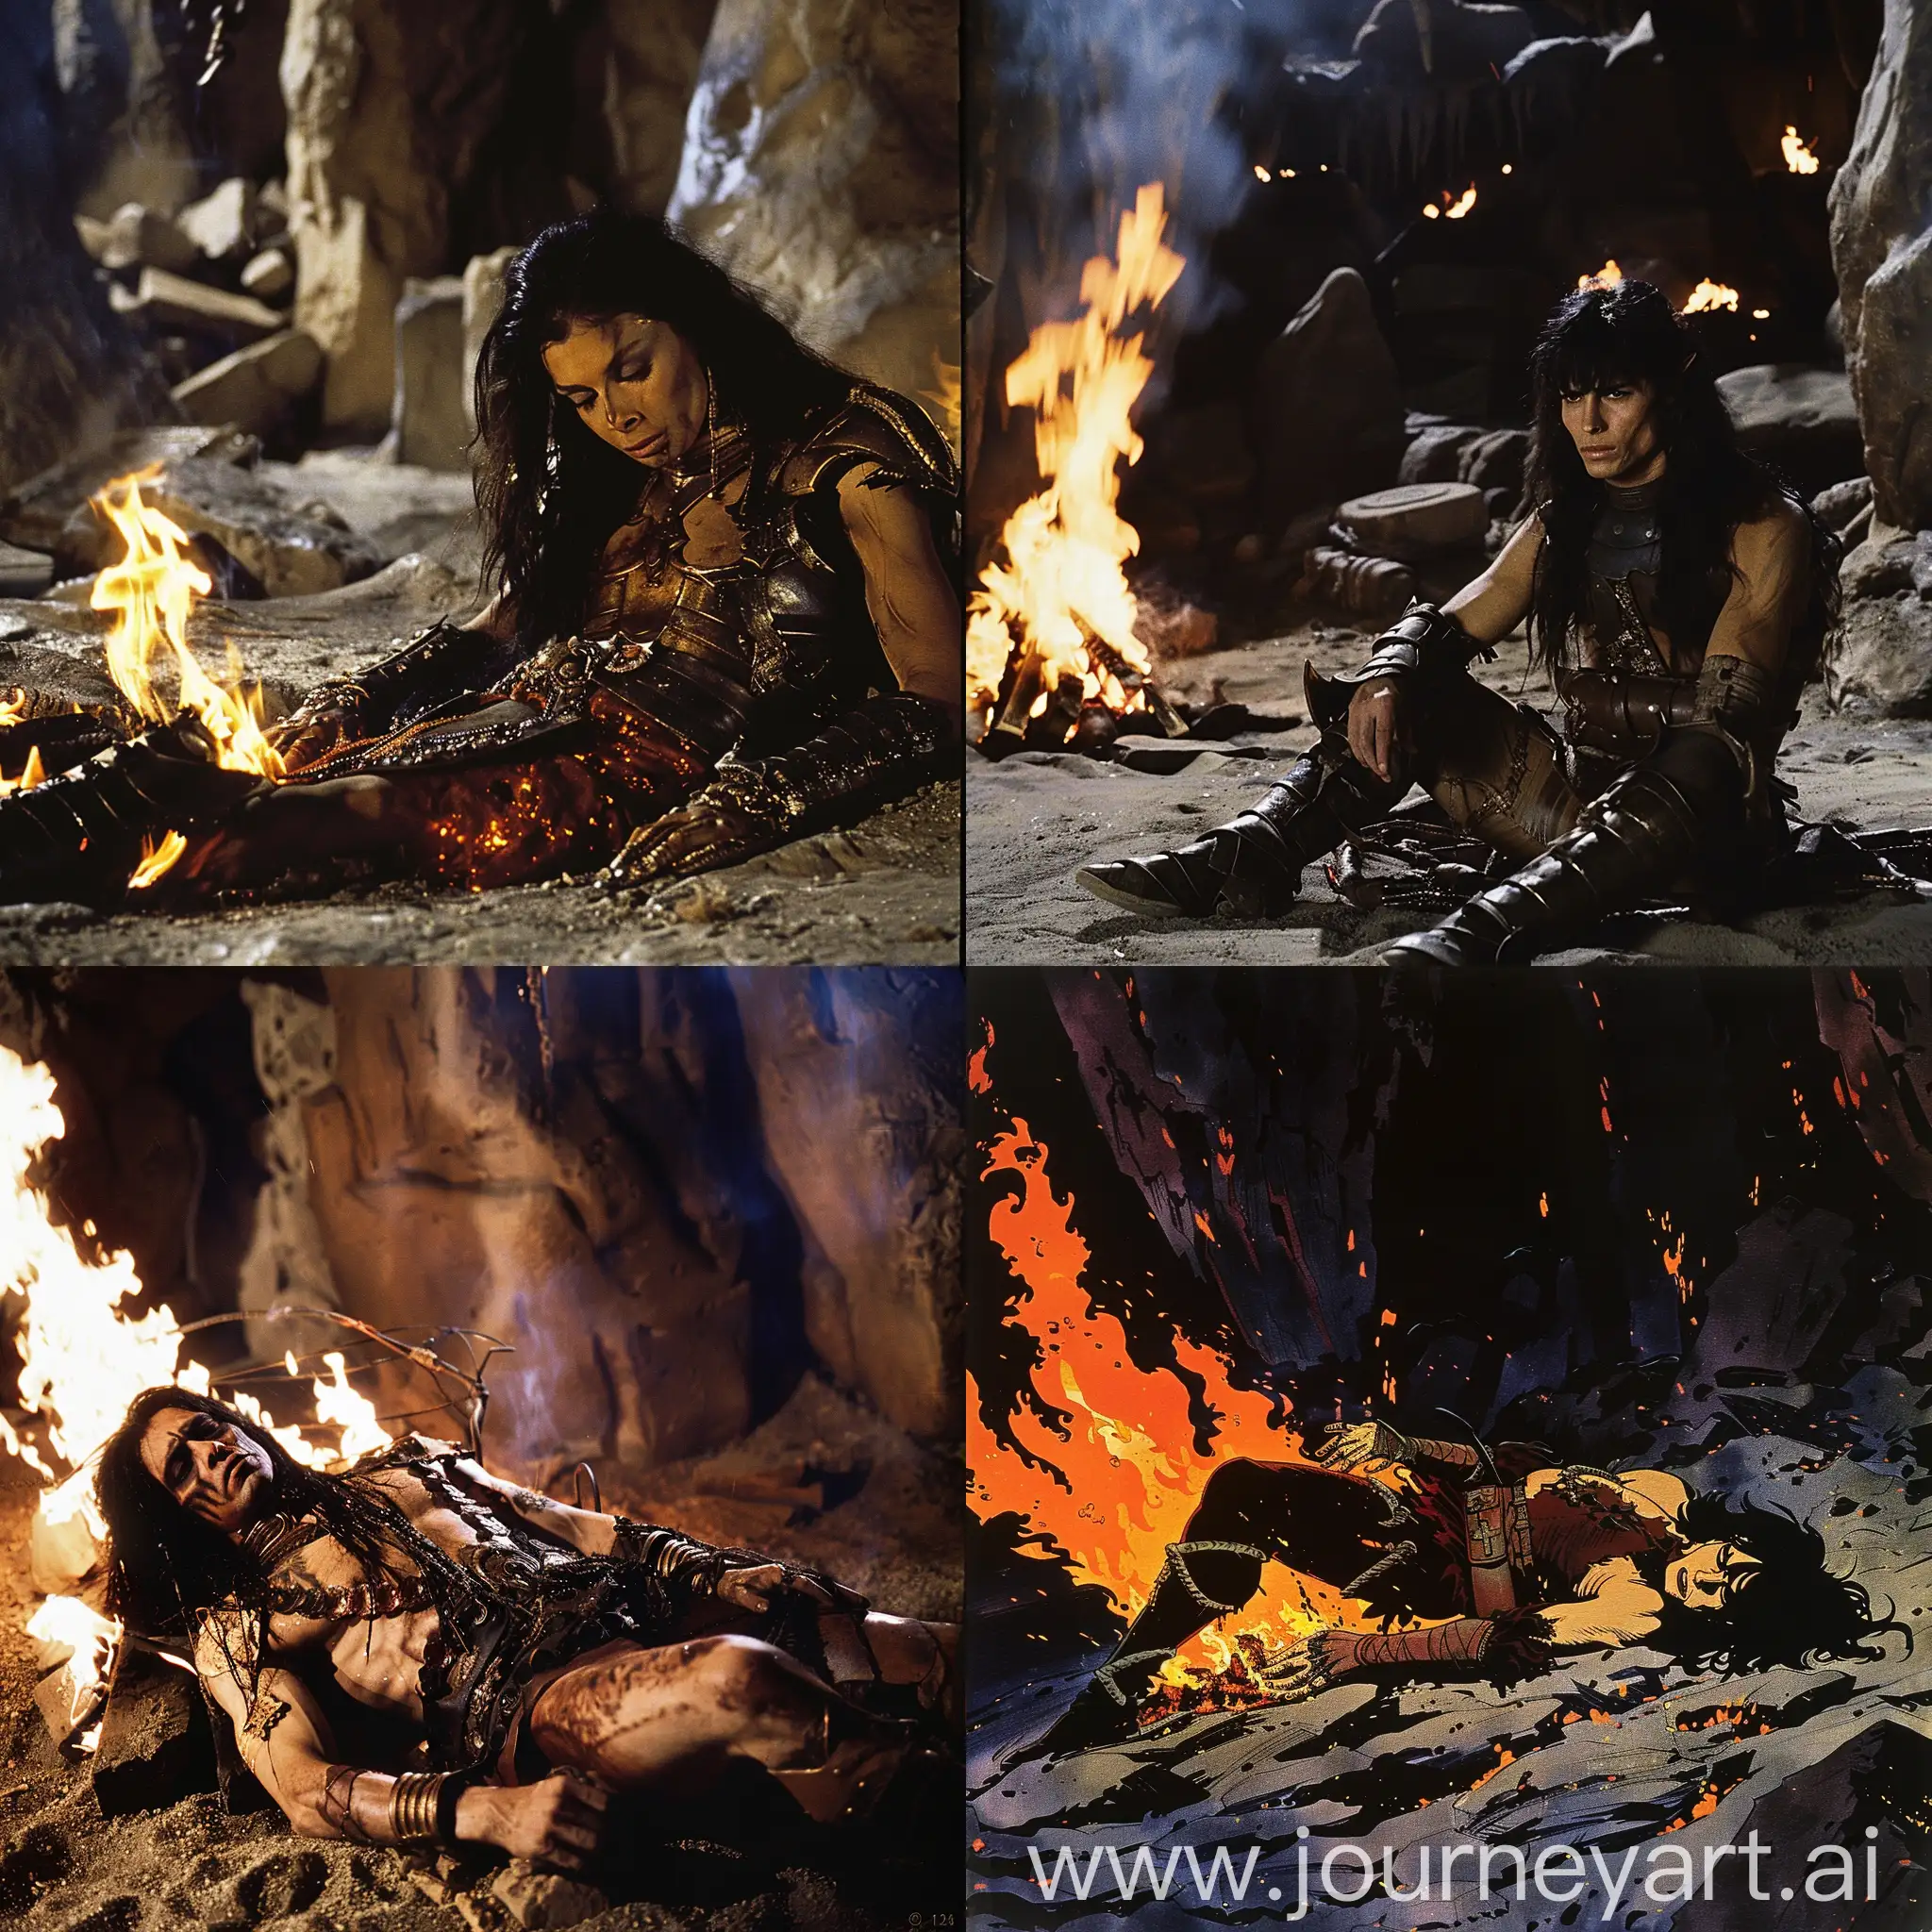 DarkHaired-Warrior-Funeral-Pyre-Arx-Fatalis-DVD-Screen-Grabs